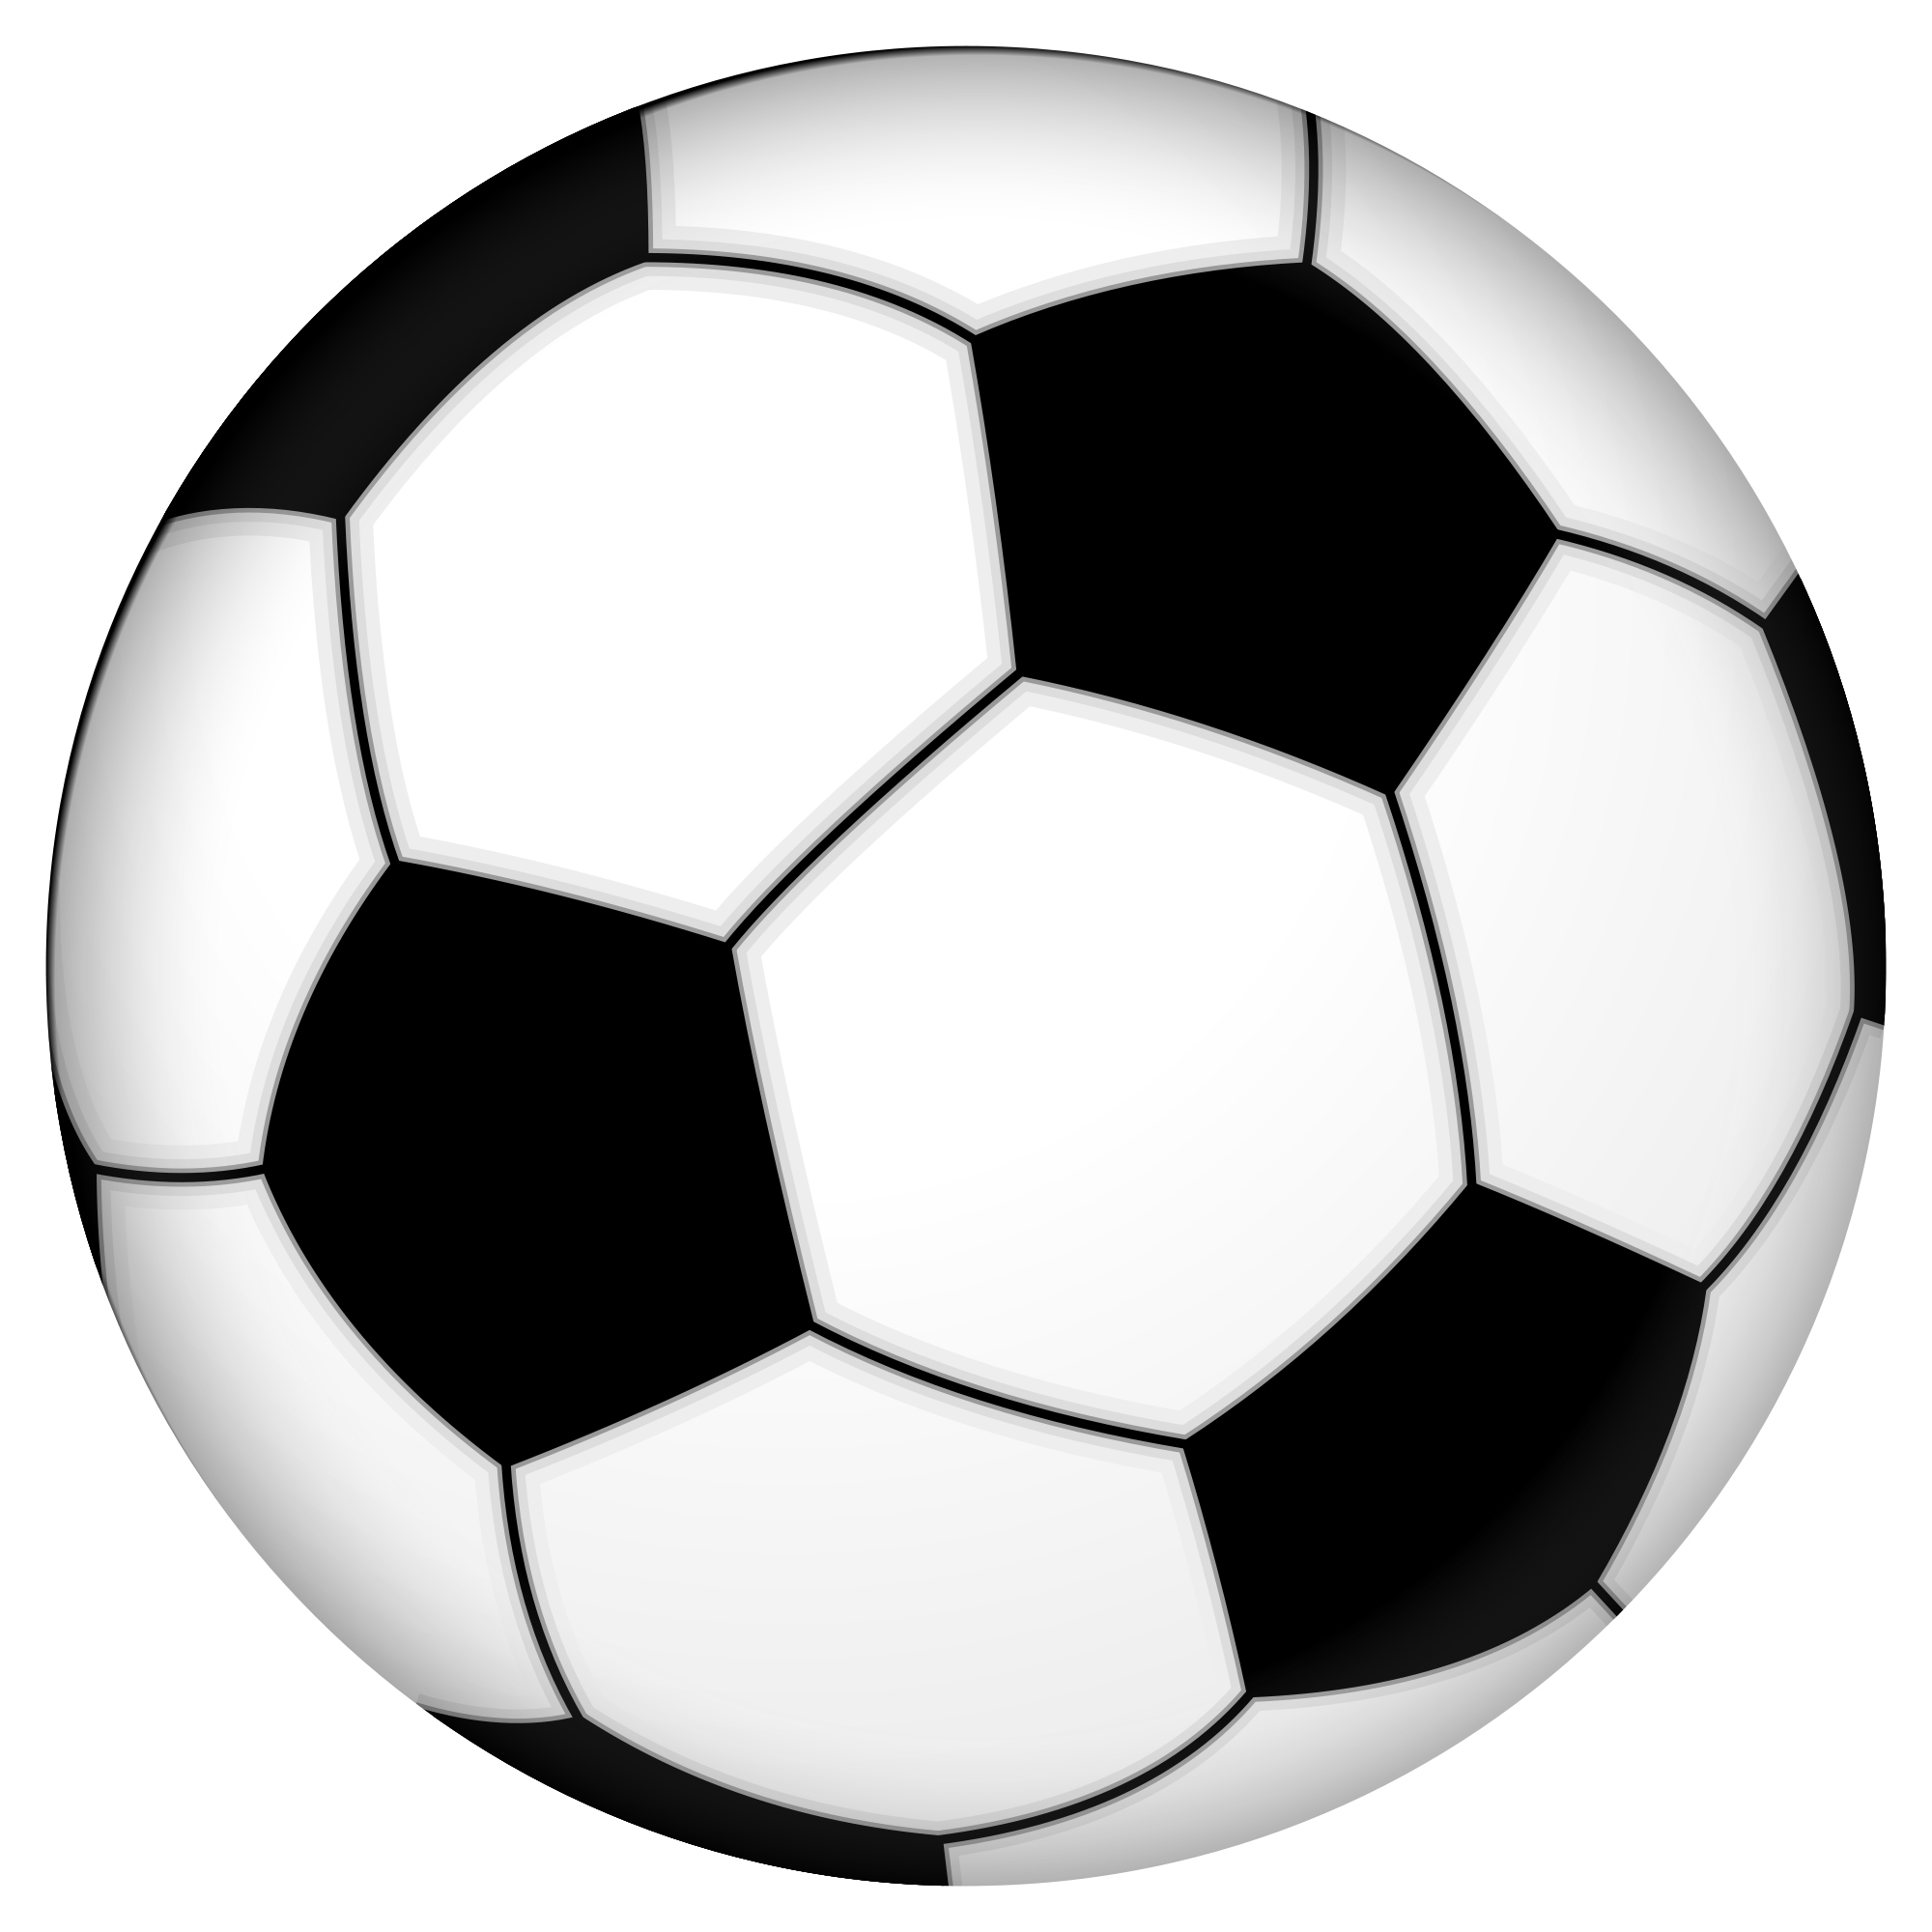 Pictures Of Soccer Balls And Players - Clipart library